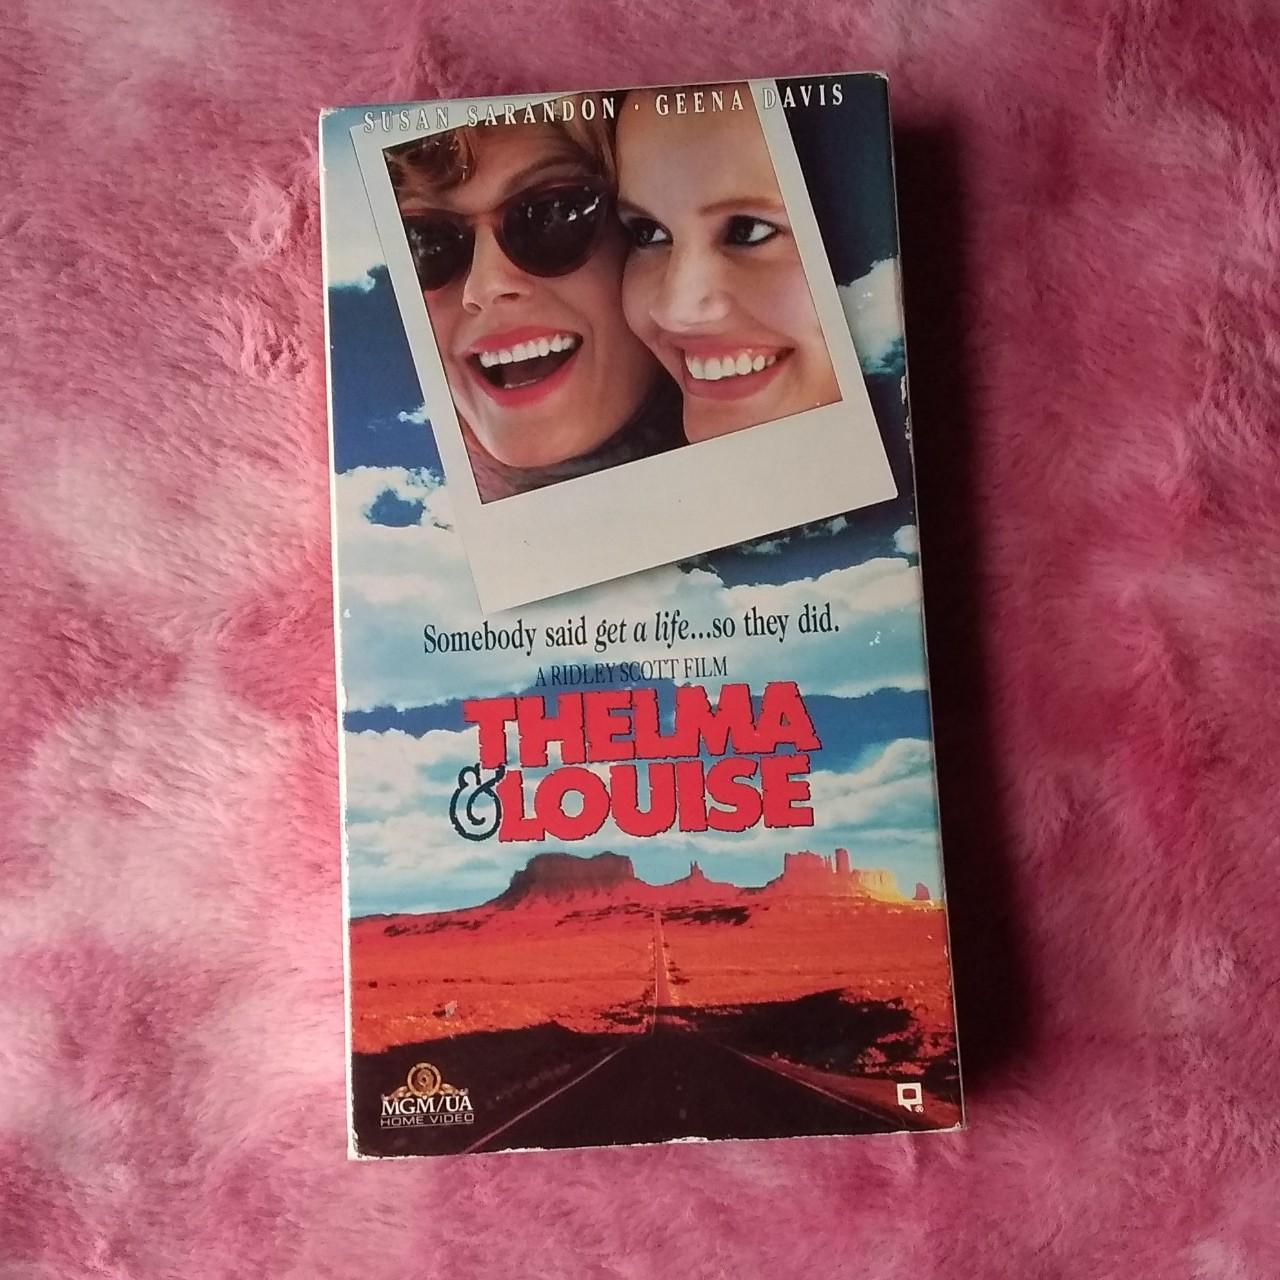 Thelma and Louise inspired best friend bag - Depop